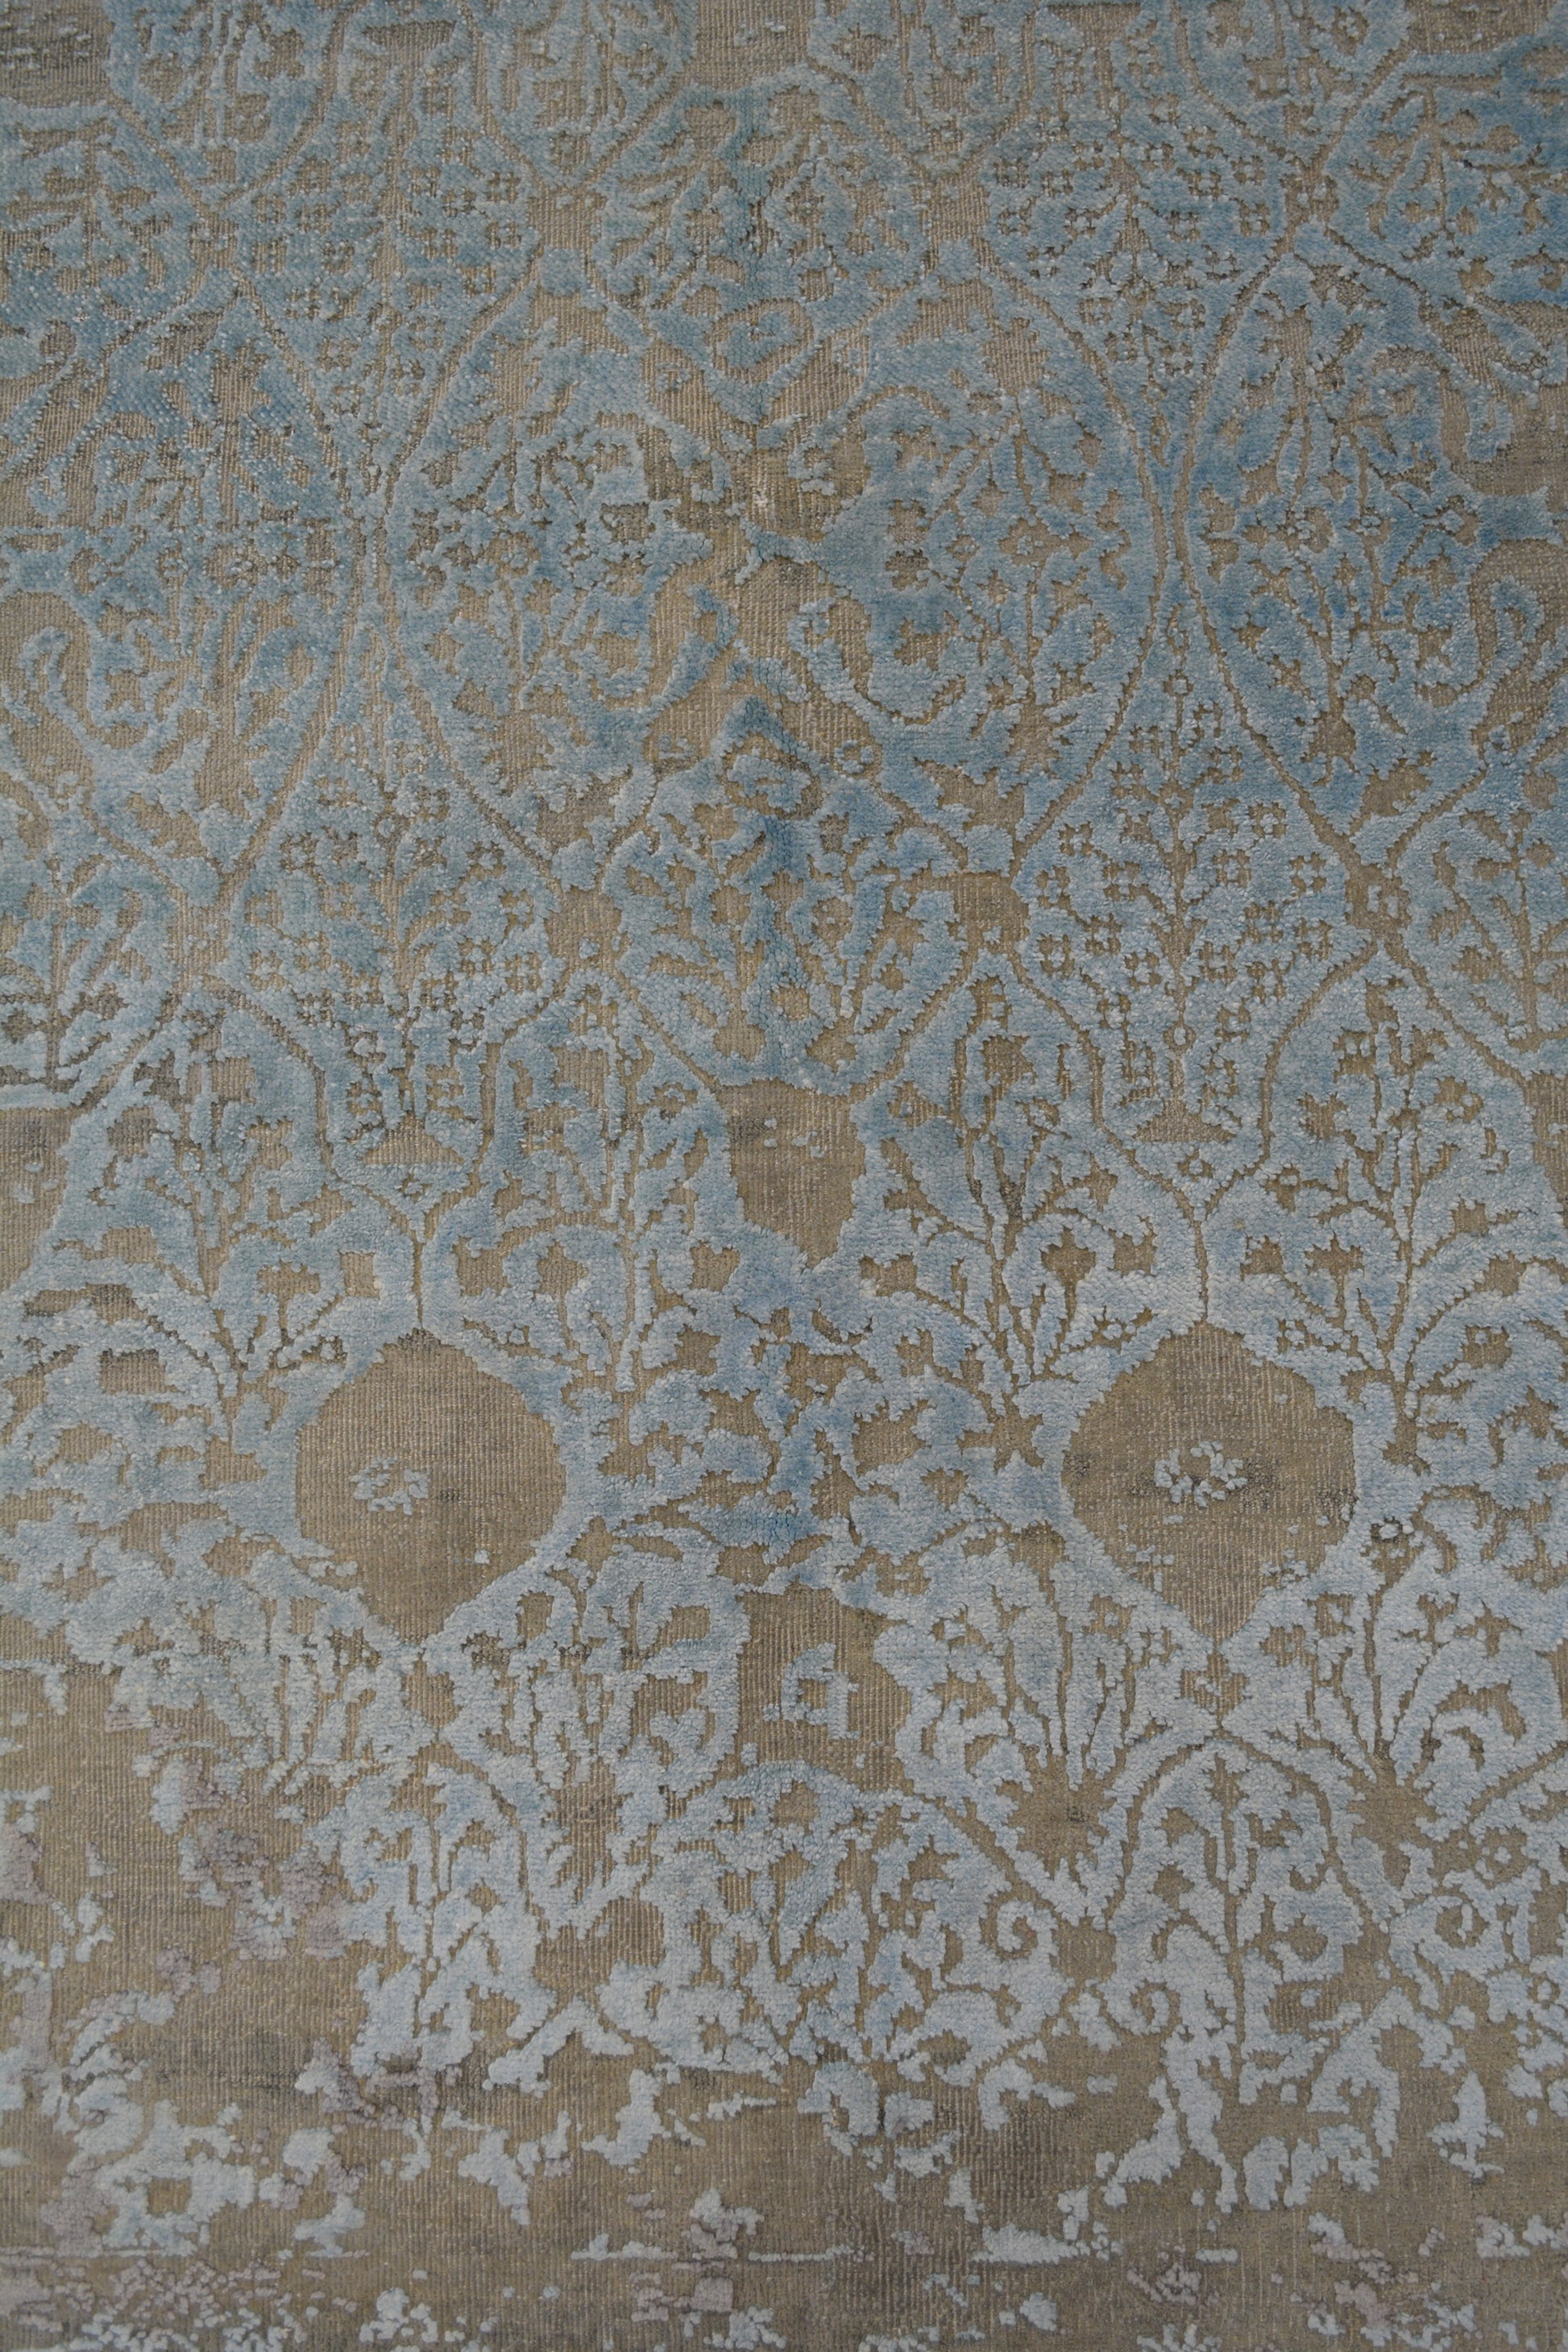 in the center of the rug, there is a gradient from a bottom white to top light blue with a climbing branches as a pattern.